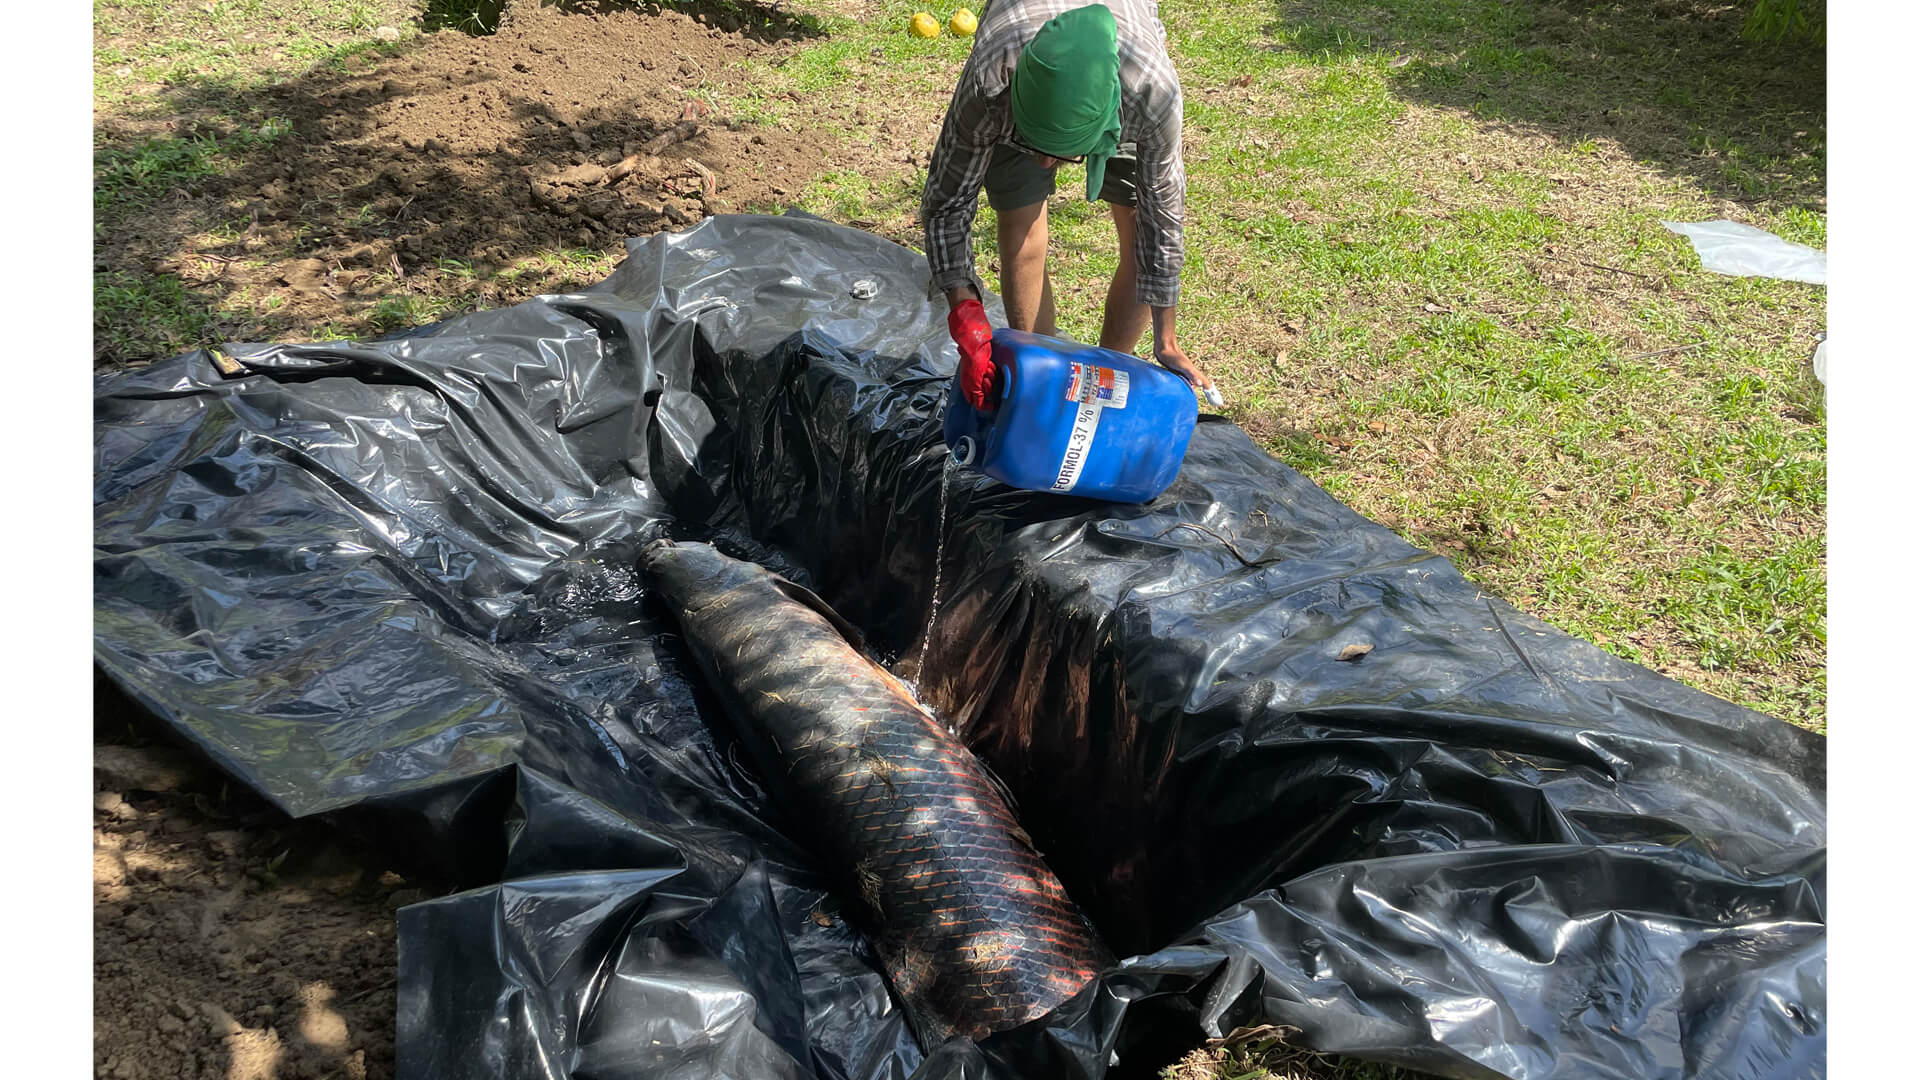 To preserve the newly caught Arapaima, Francis Boily pours formaldehyde into the plastic-lined ditch to create an embalming bath. 